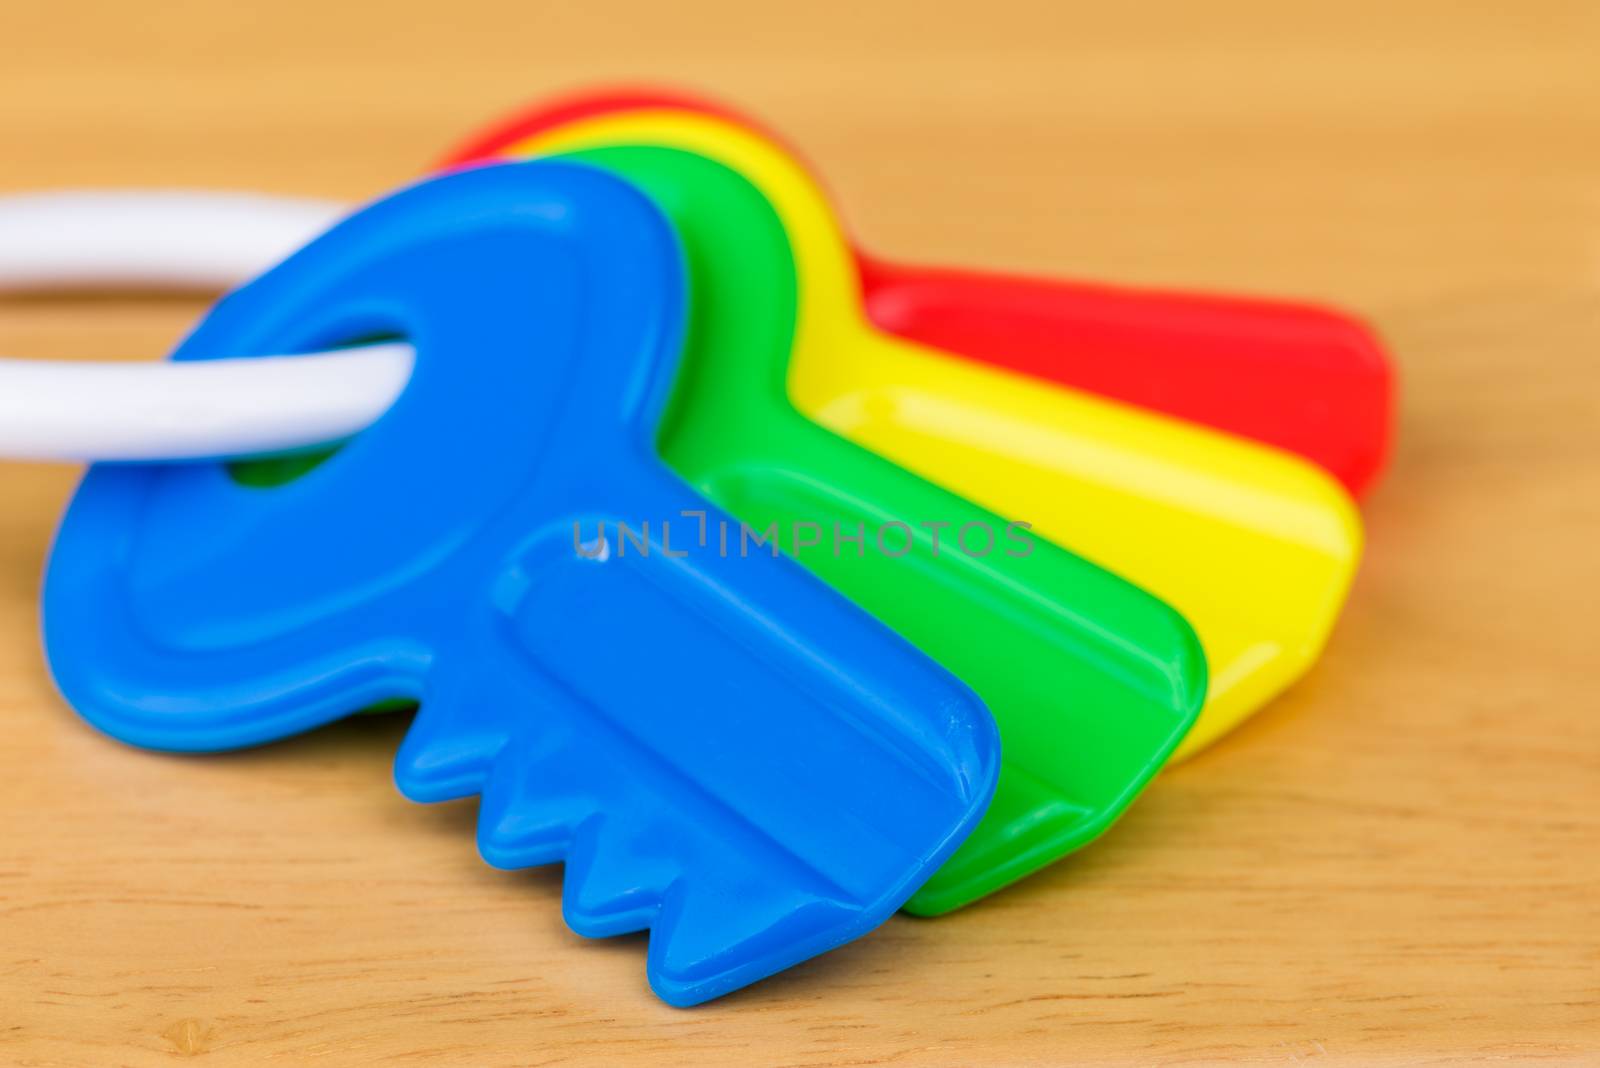 A close up shot of four colorful kid's toy keys.